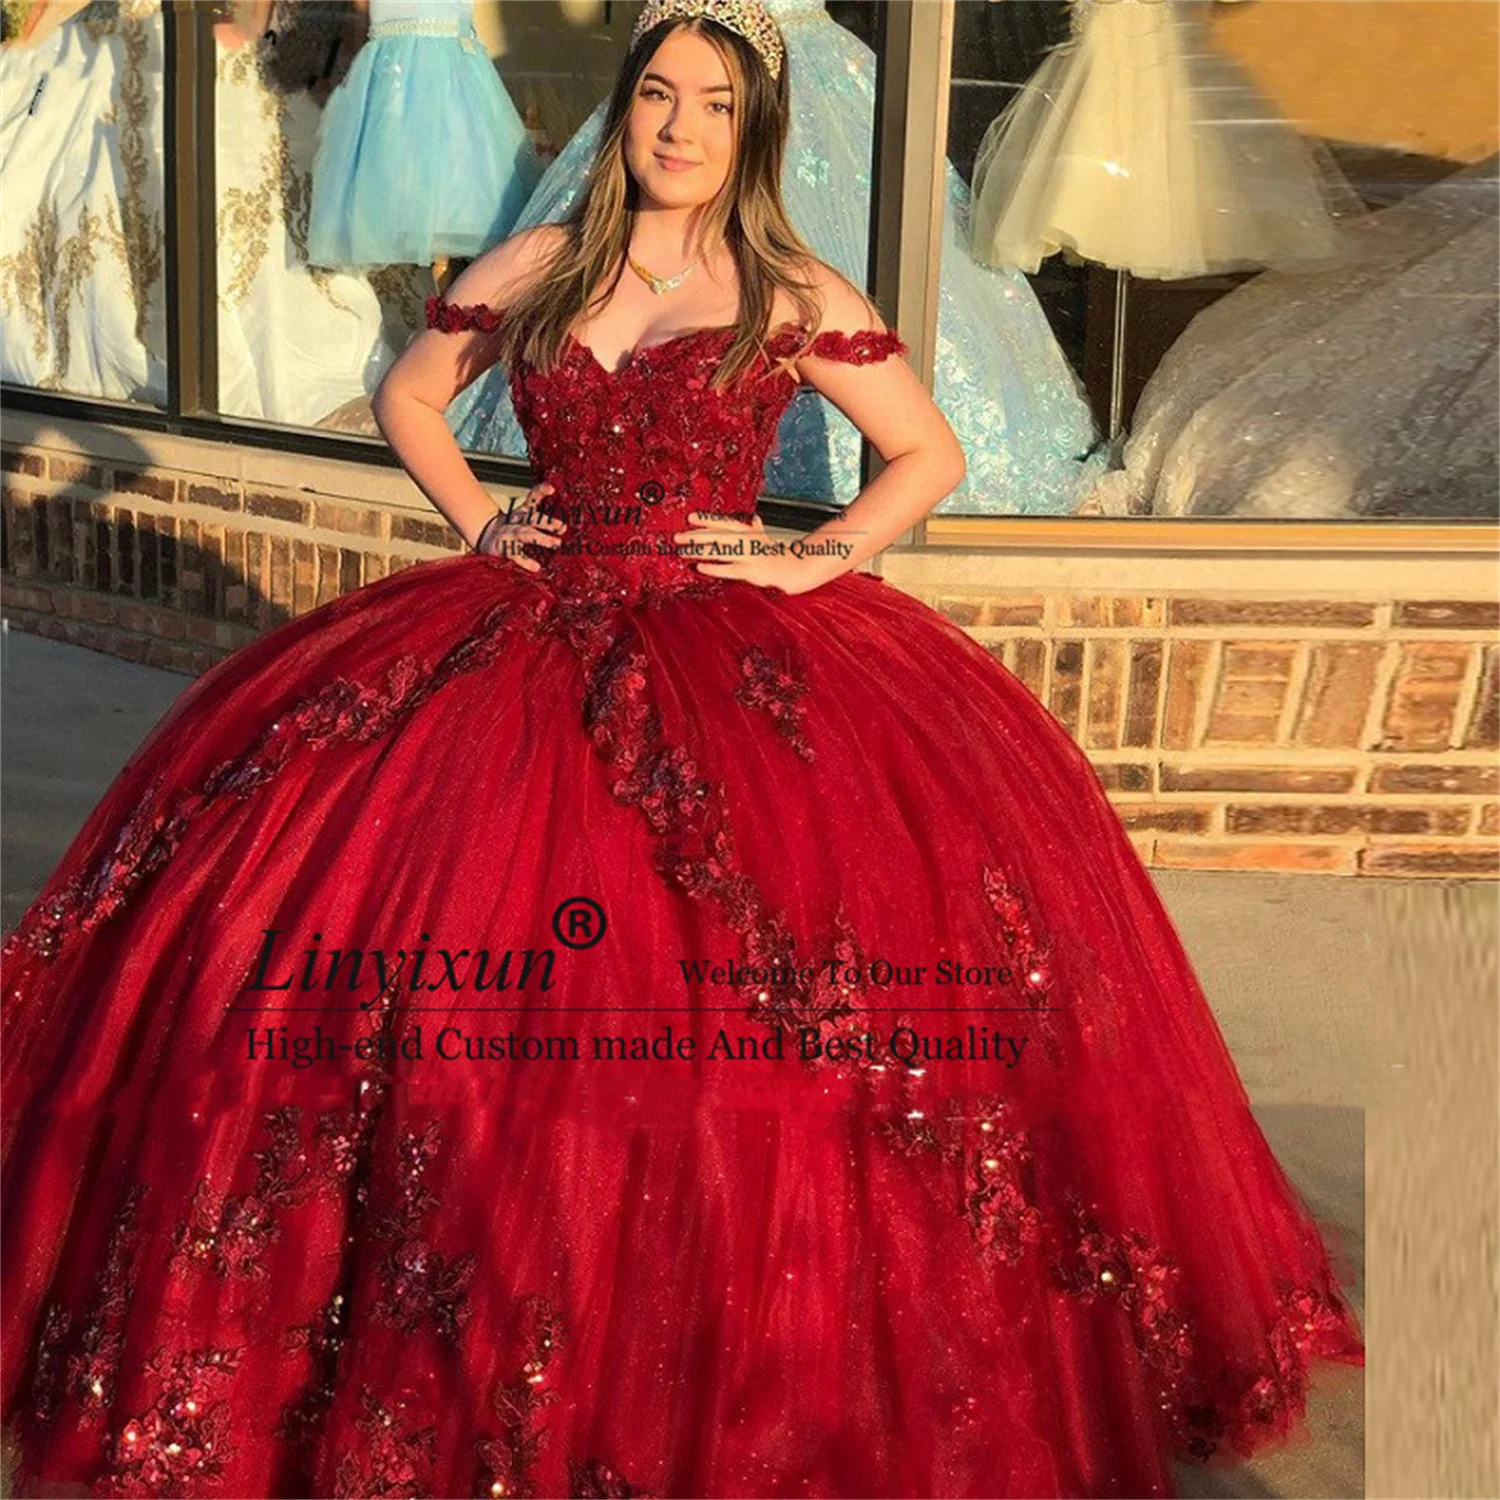 

Luxury Burgundy Ball Gown Quinceanera Dresses Lace Beads Sweet 16 Dress Princess Dresses For 15 Years Vestidos de 15 años anos